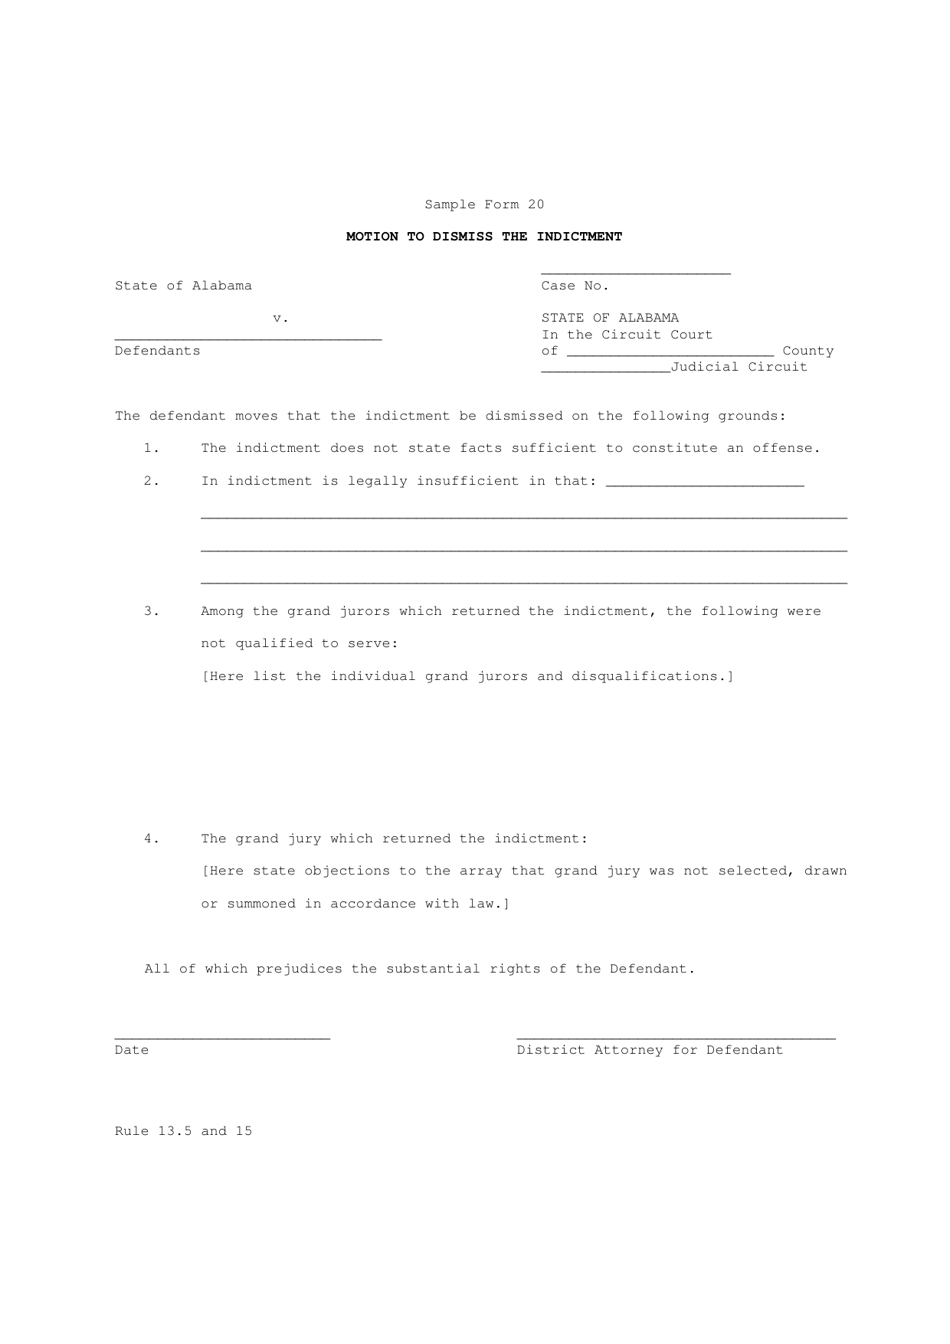 Sample Form 20 Motion to Dismiss the Indictment - Alabama, Page 1